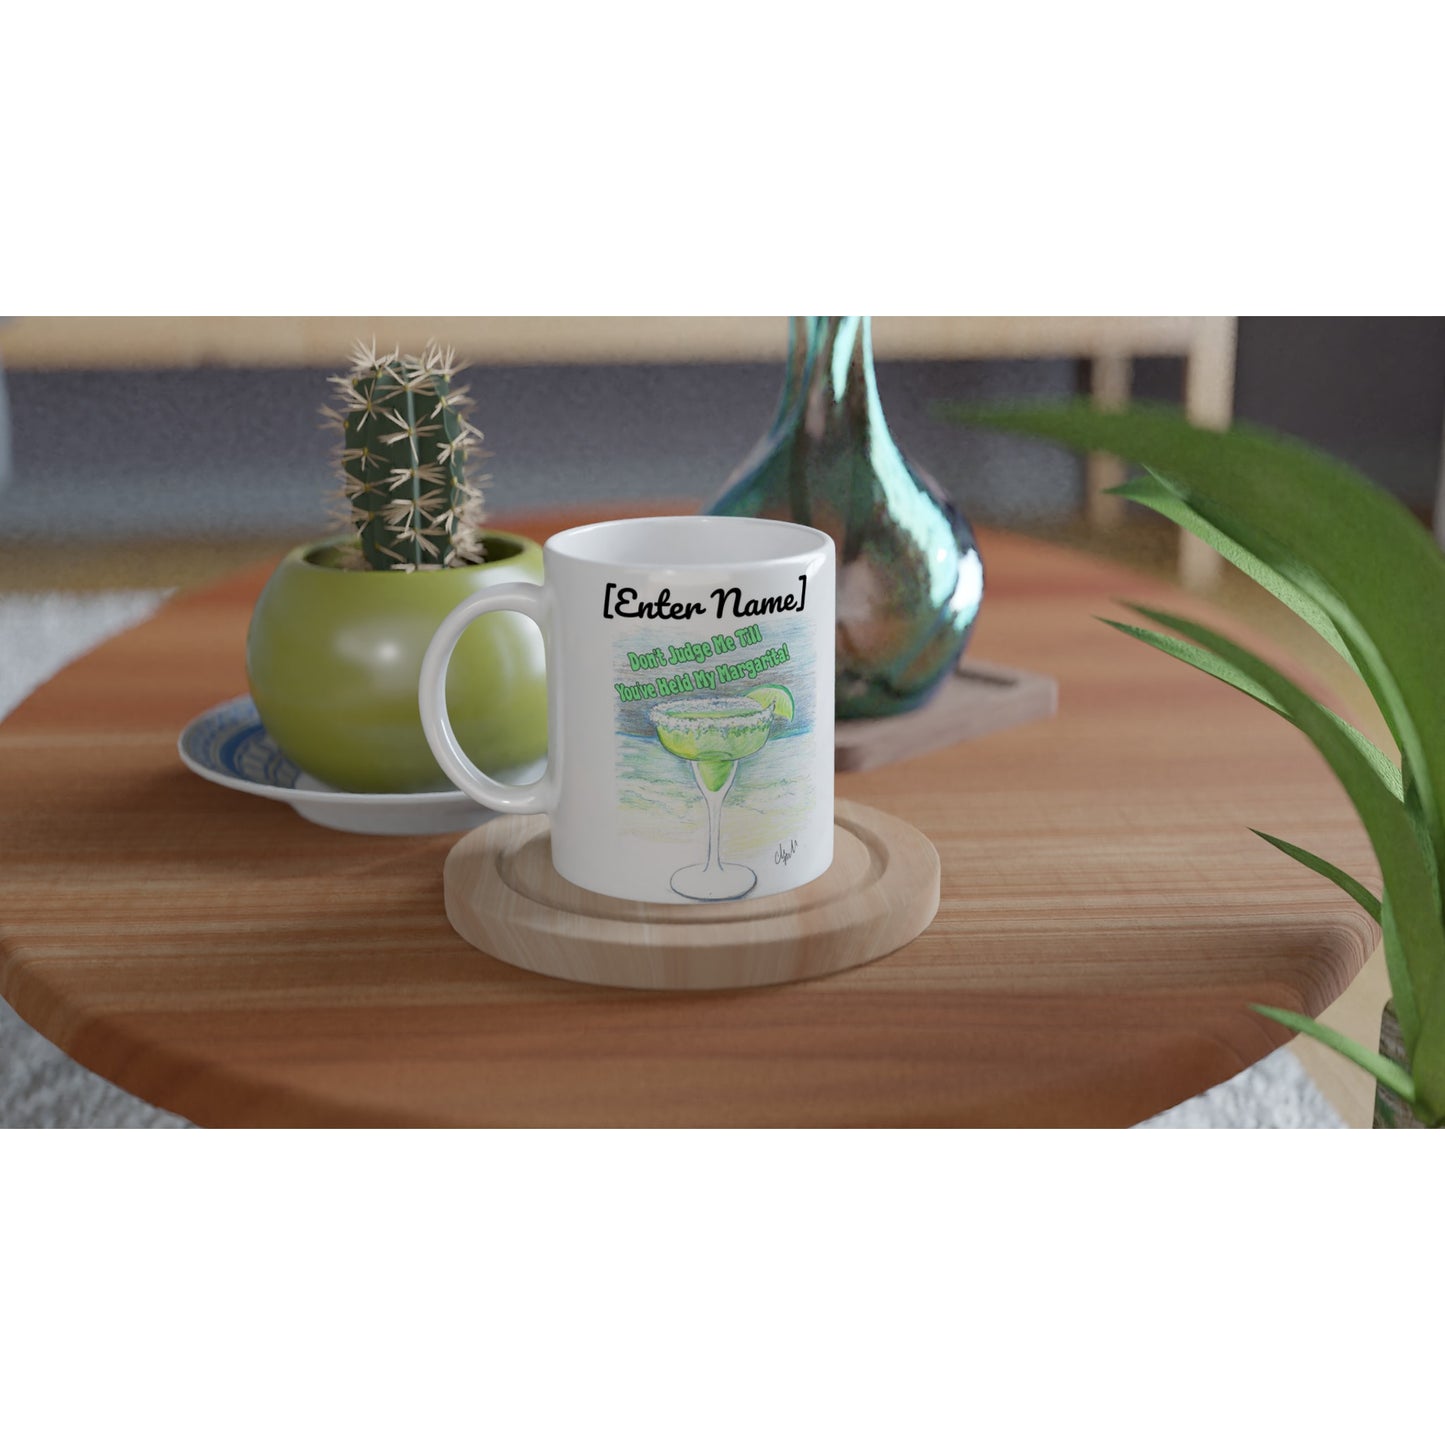 Personalized white ceramic 11oz mug with motto Don't Judge Me till You've Held my Margarita coffee mug dishwasher and microwave safe from WhatYa Say Apparel sitting on coaster on coffee table with green potted cactus and silver vase.